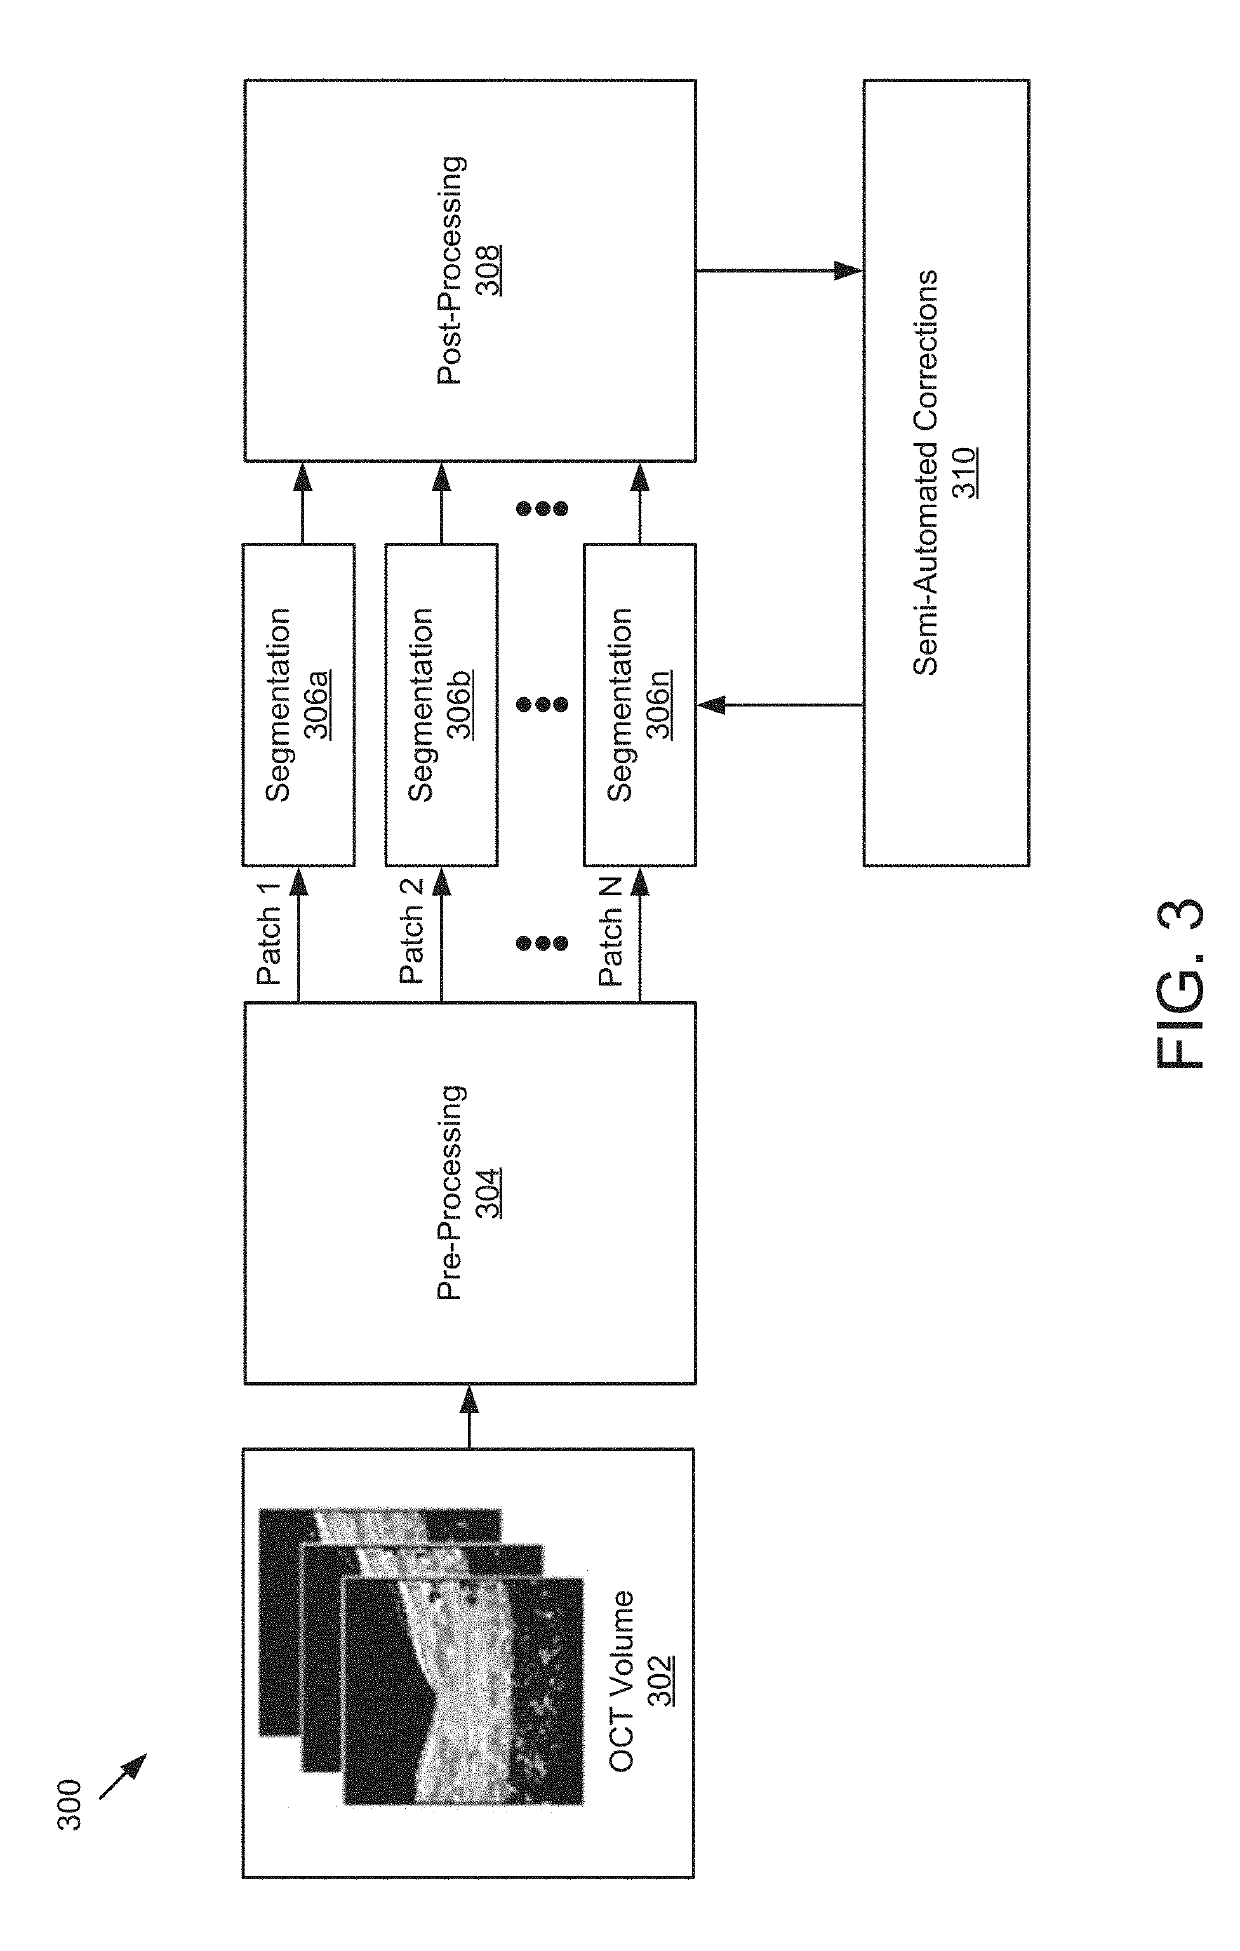 Methods and systems to detect and classify retinal structures in interferometric imaging data